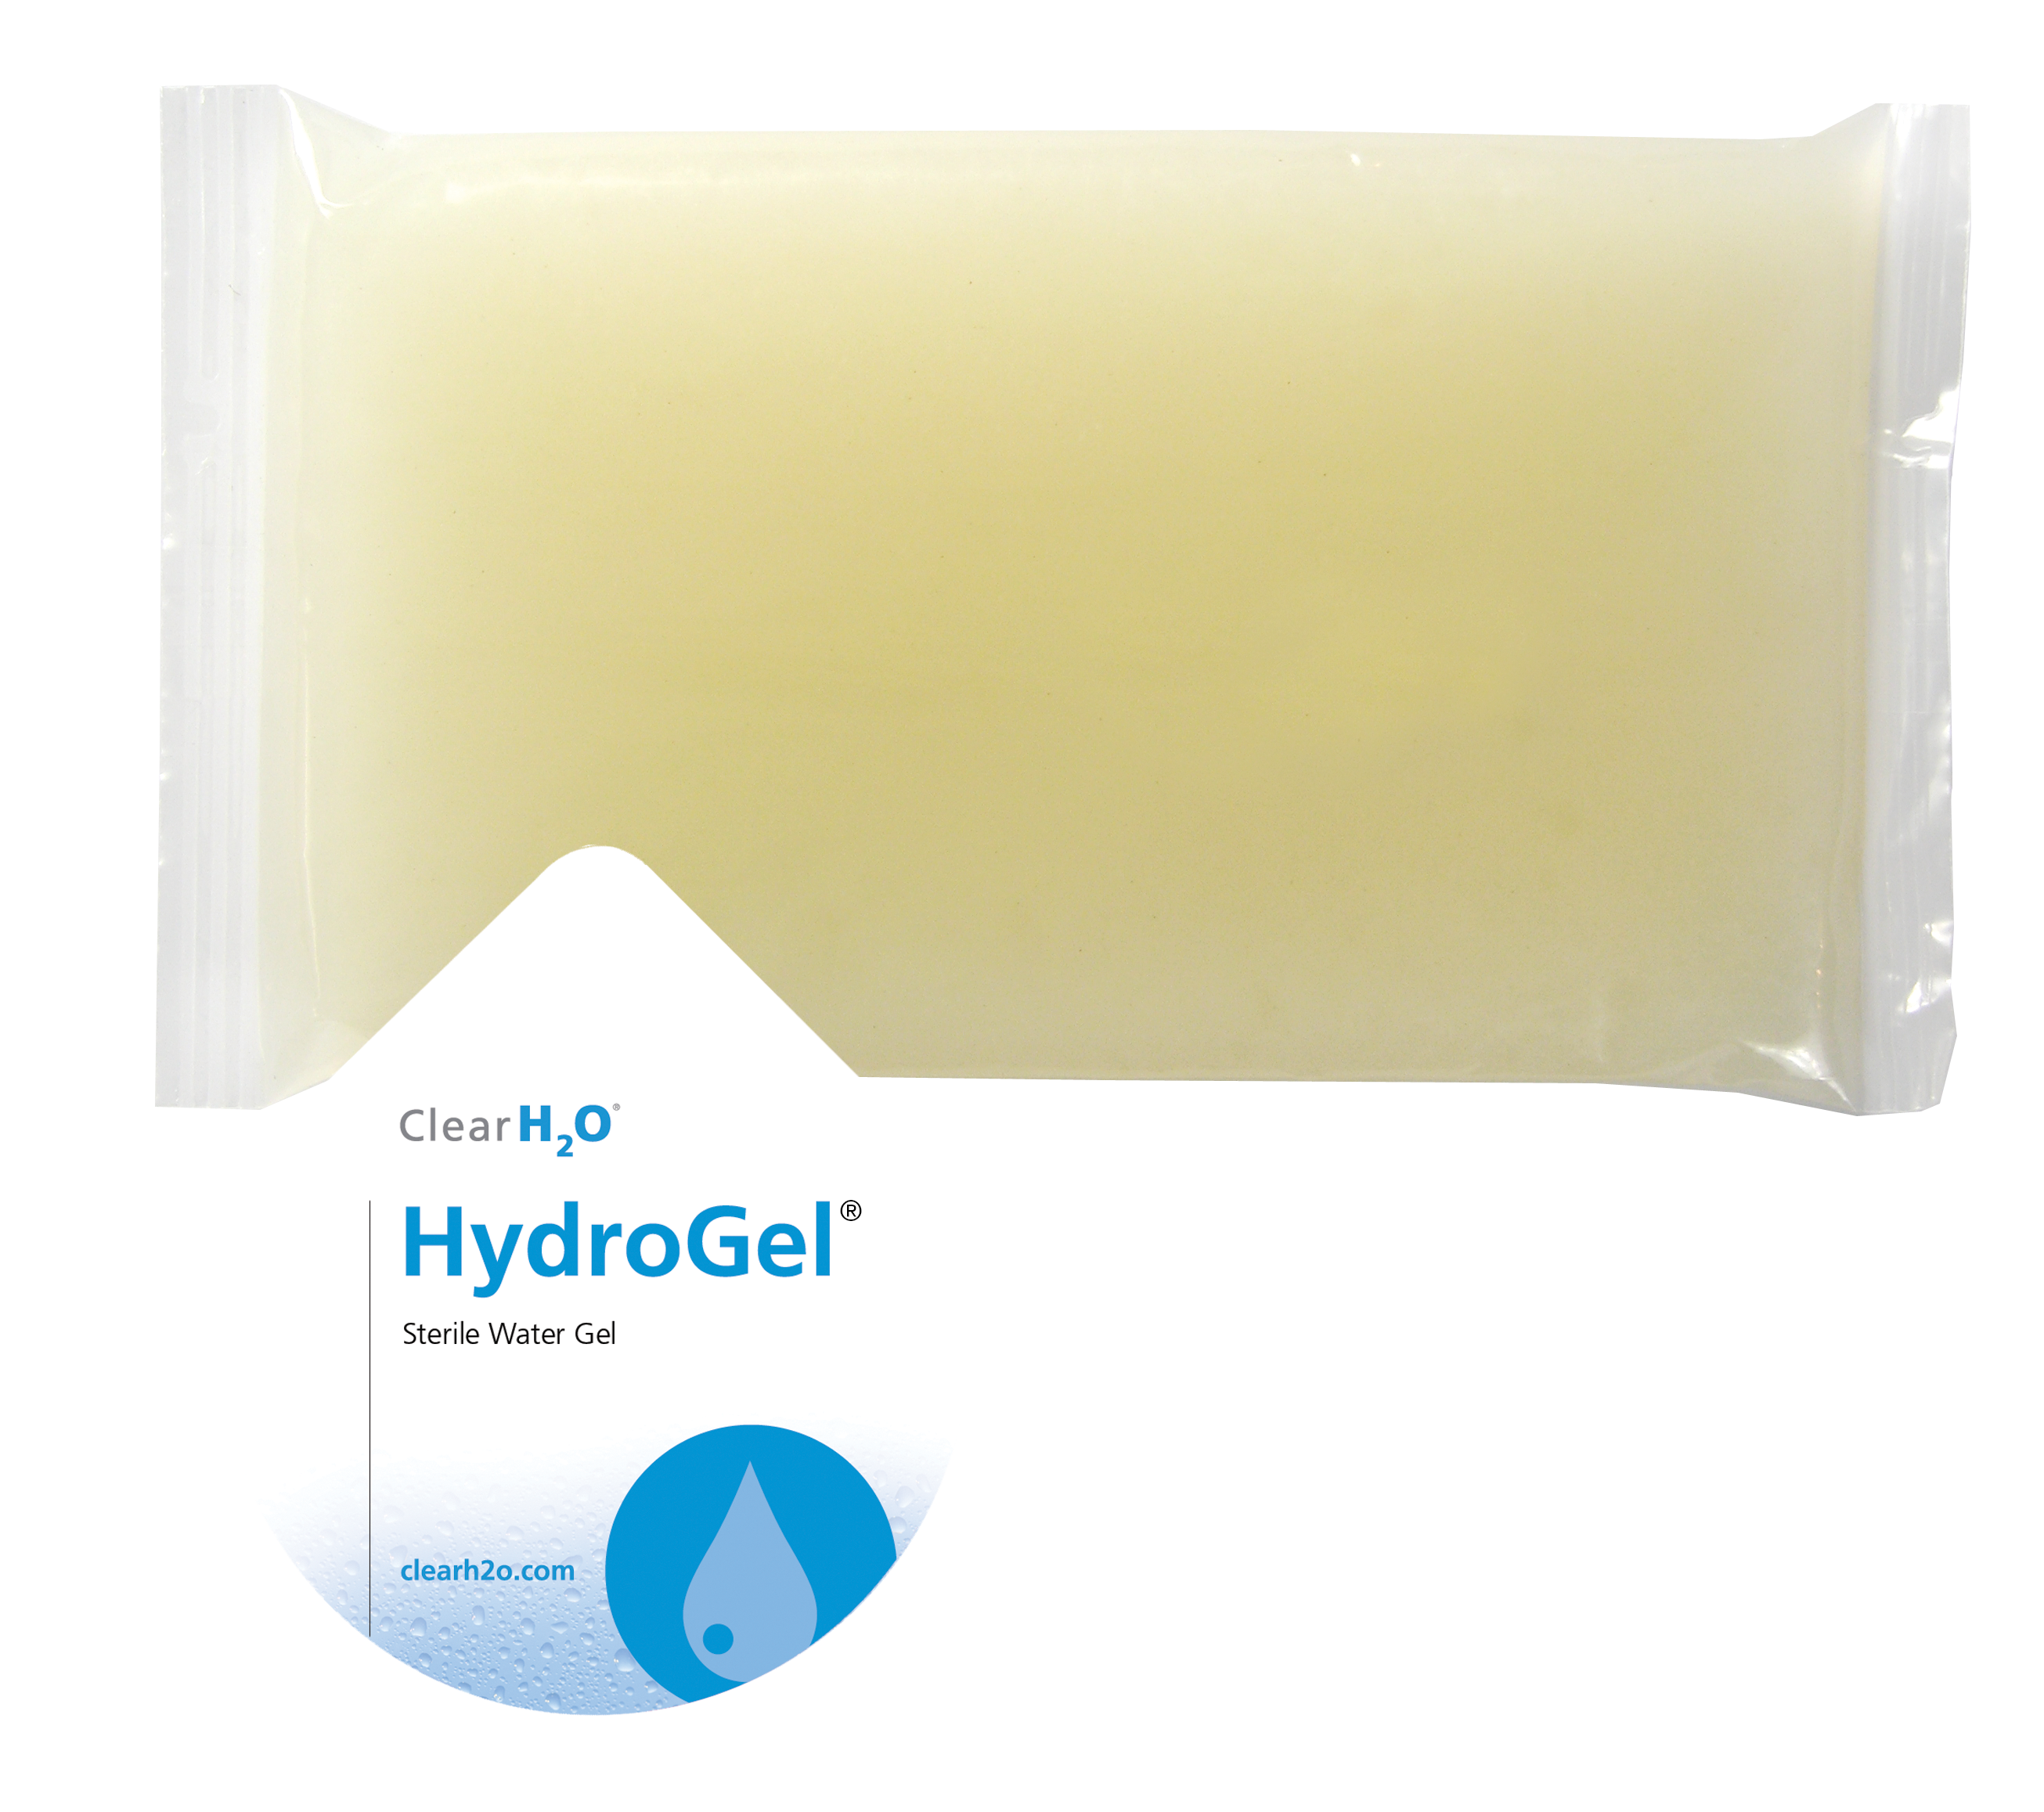 NEW: Hydrogel Max 2x Stronger—